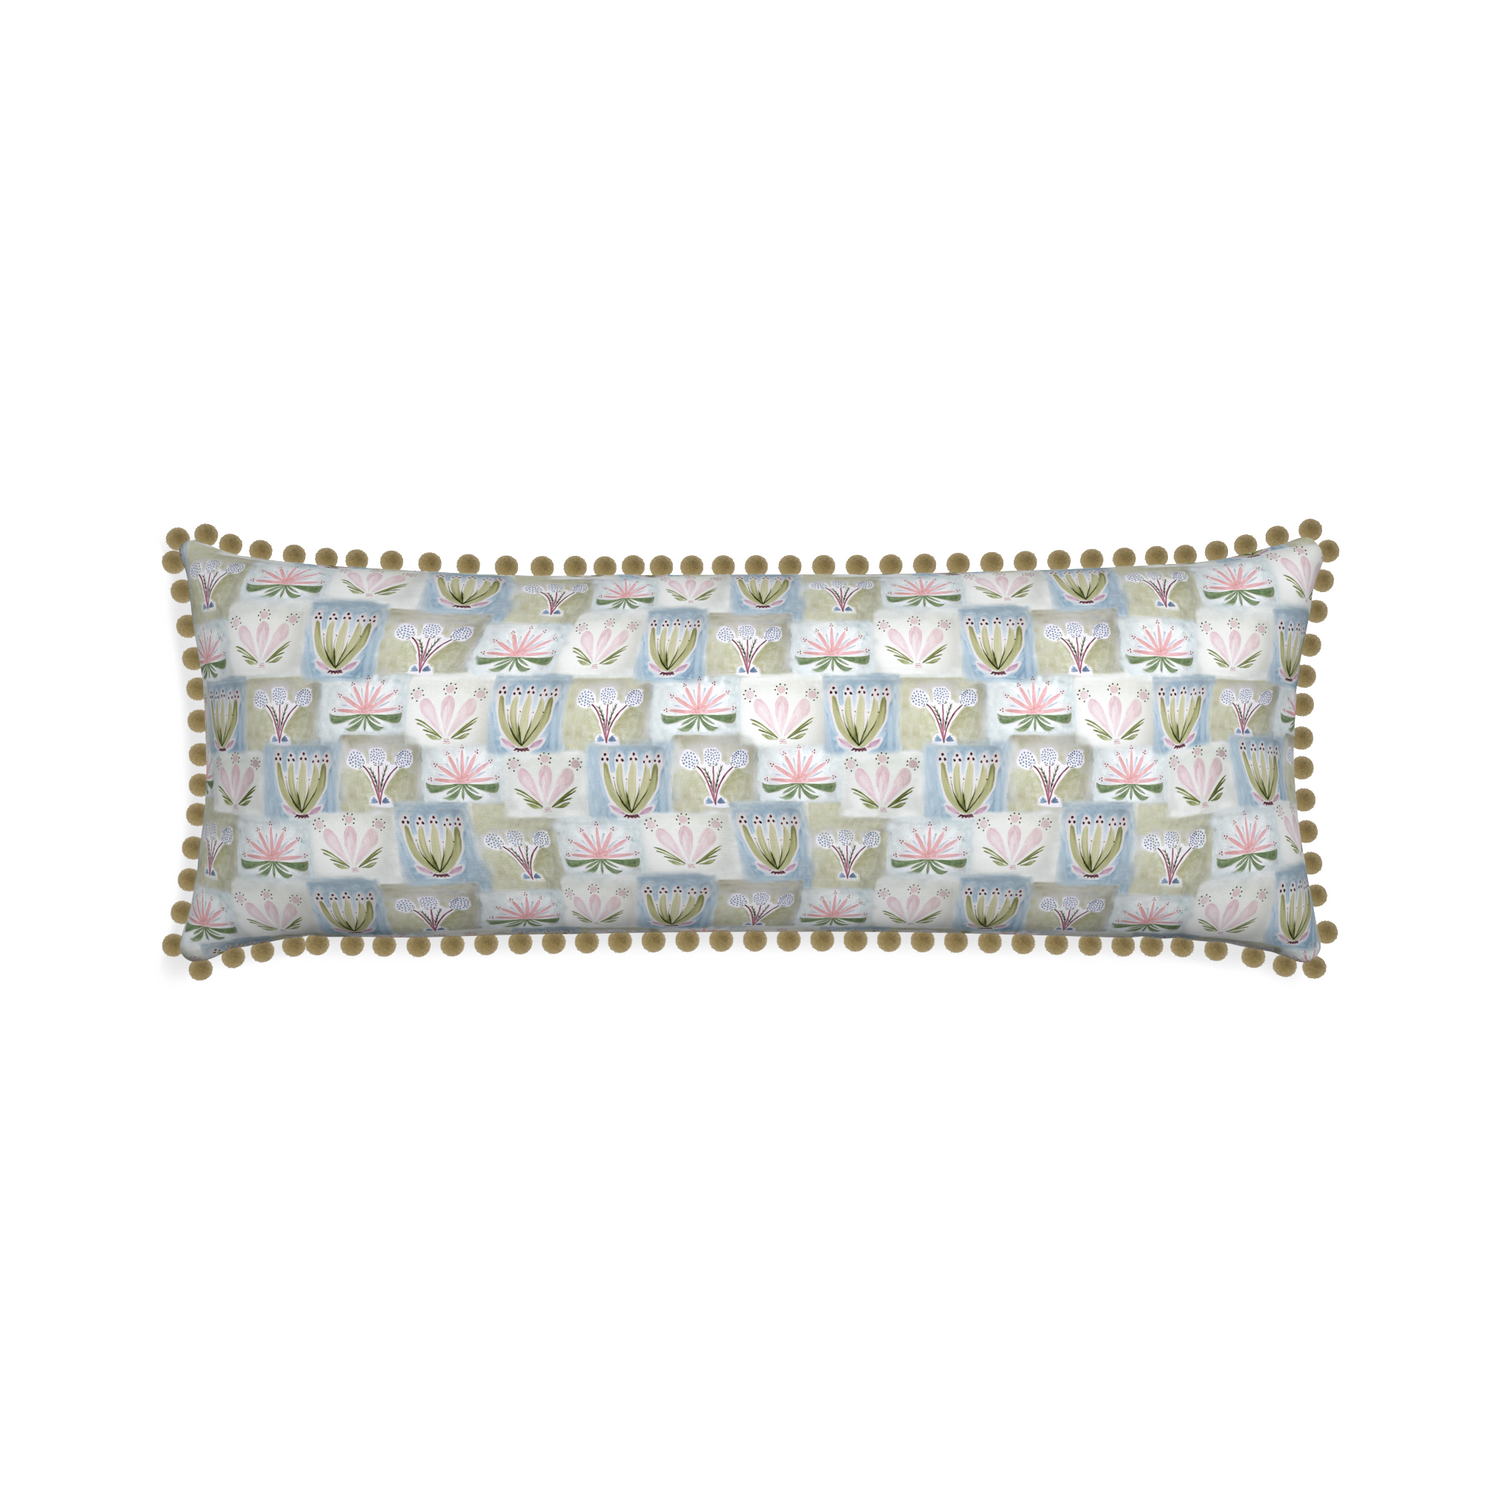 Xl-lumbar harper custom hand-painted floralpillow with olive pom pom on white background